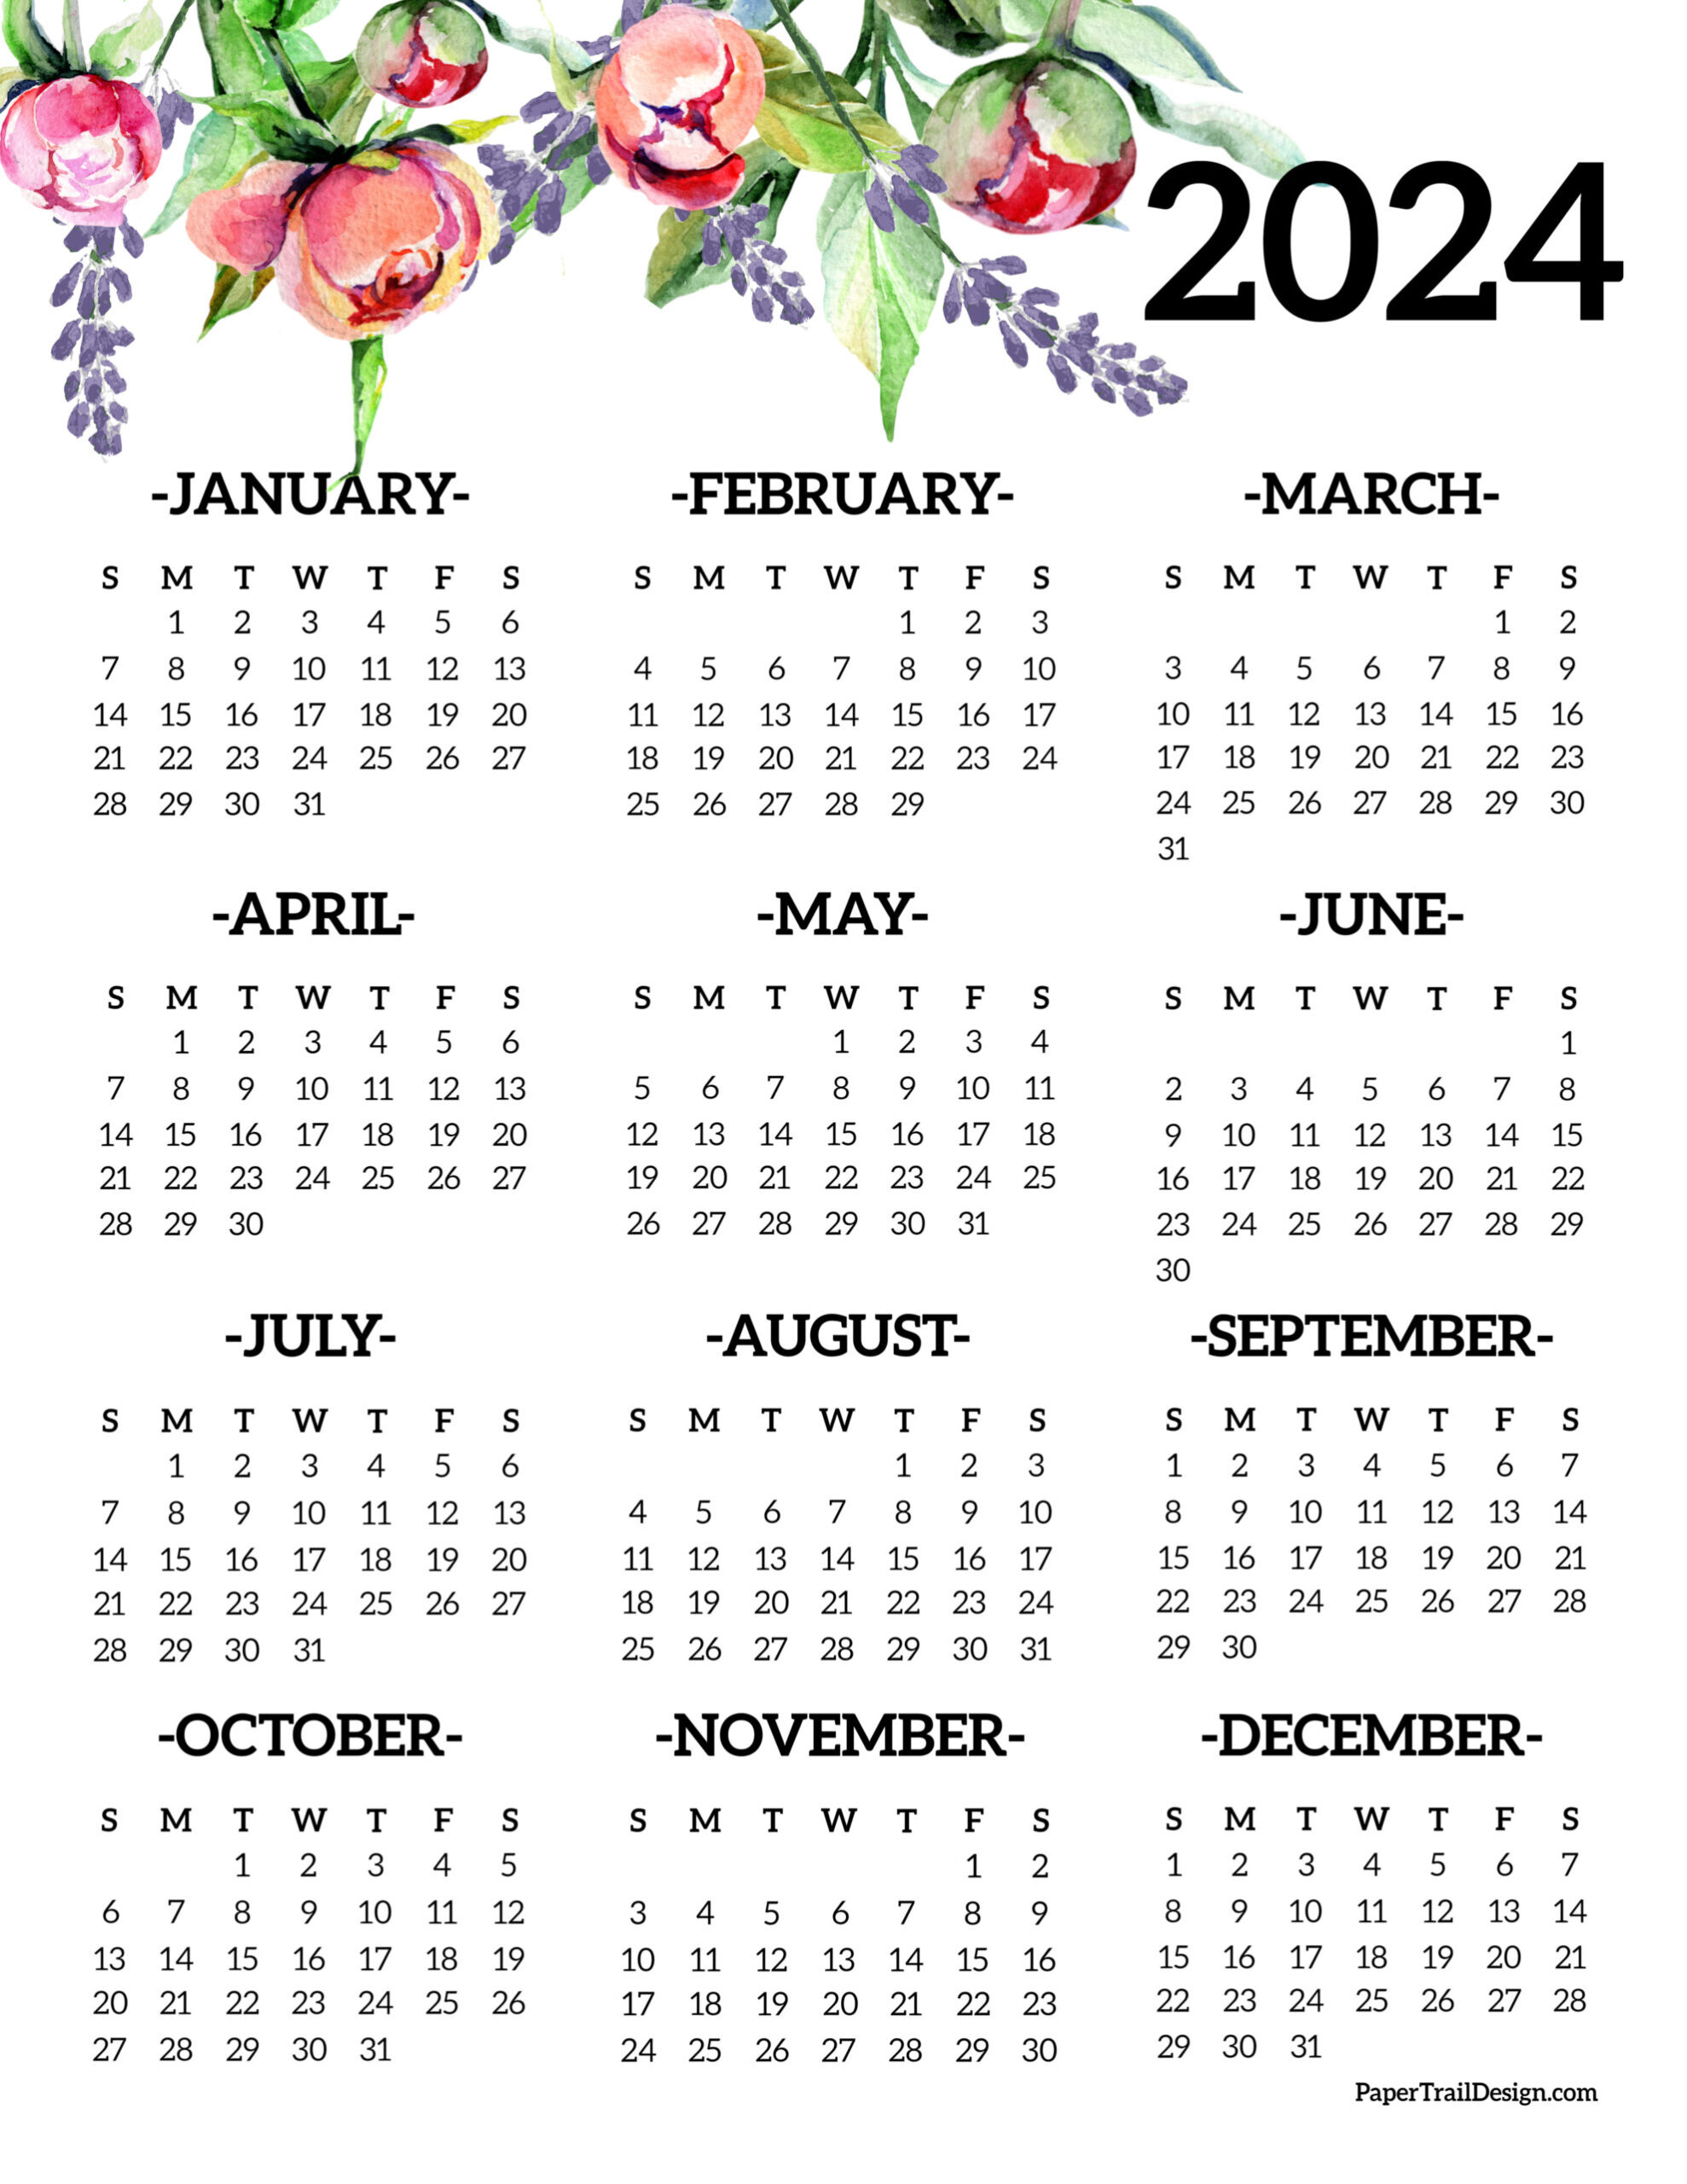 Calendar 2024 Printable One Page - Paper Trail Design for One Page Calendar 2024 Printable